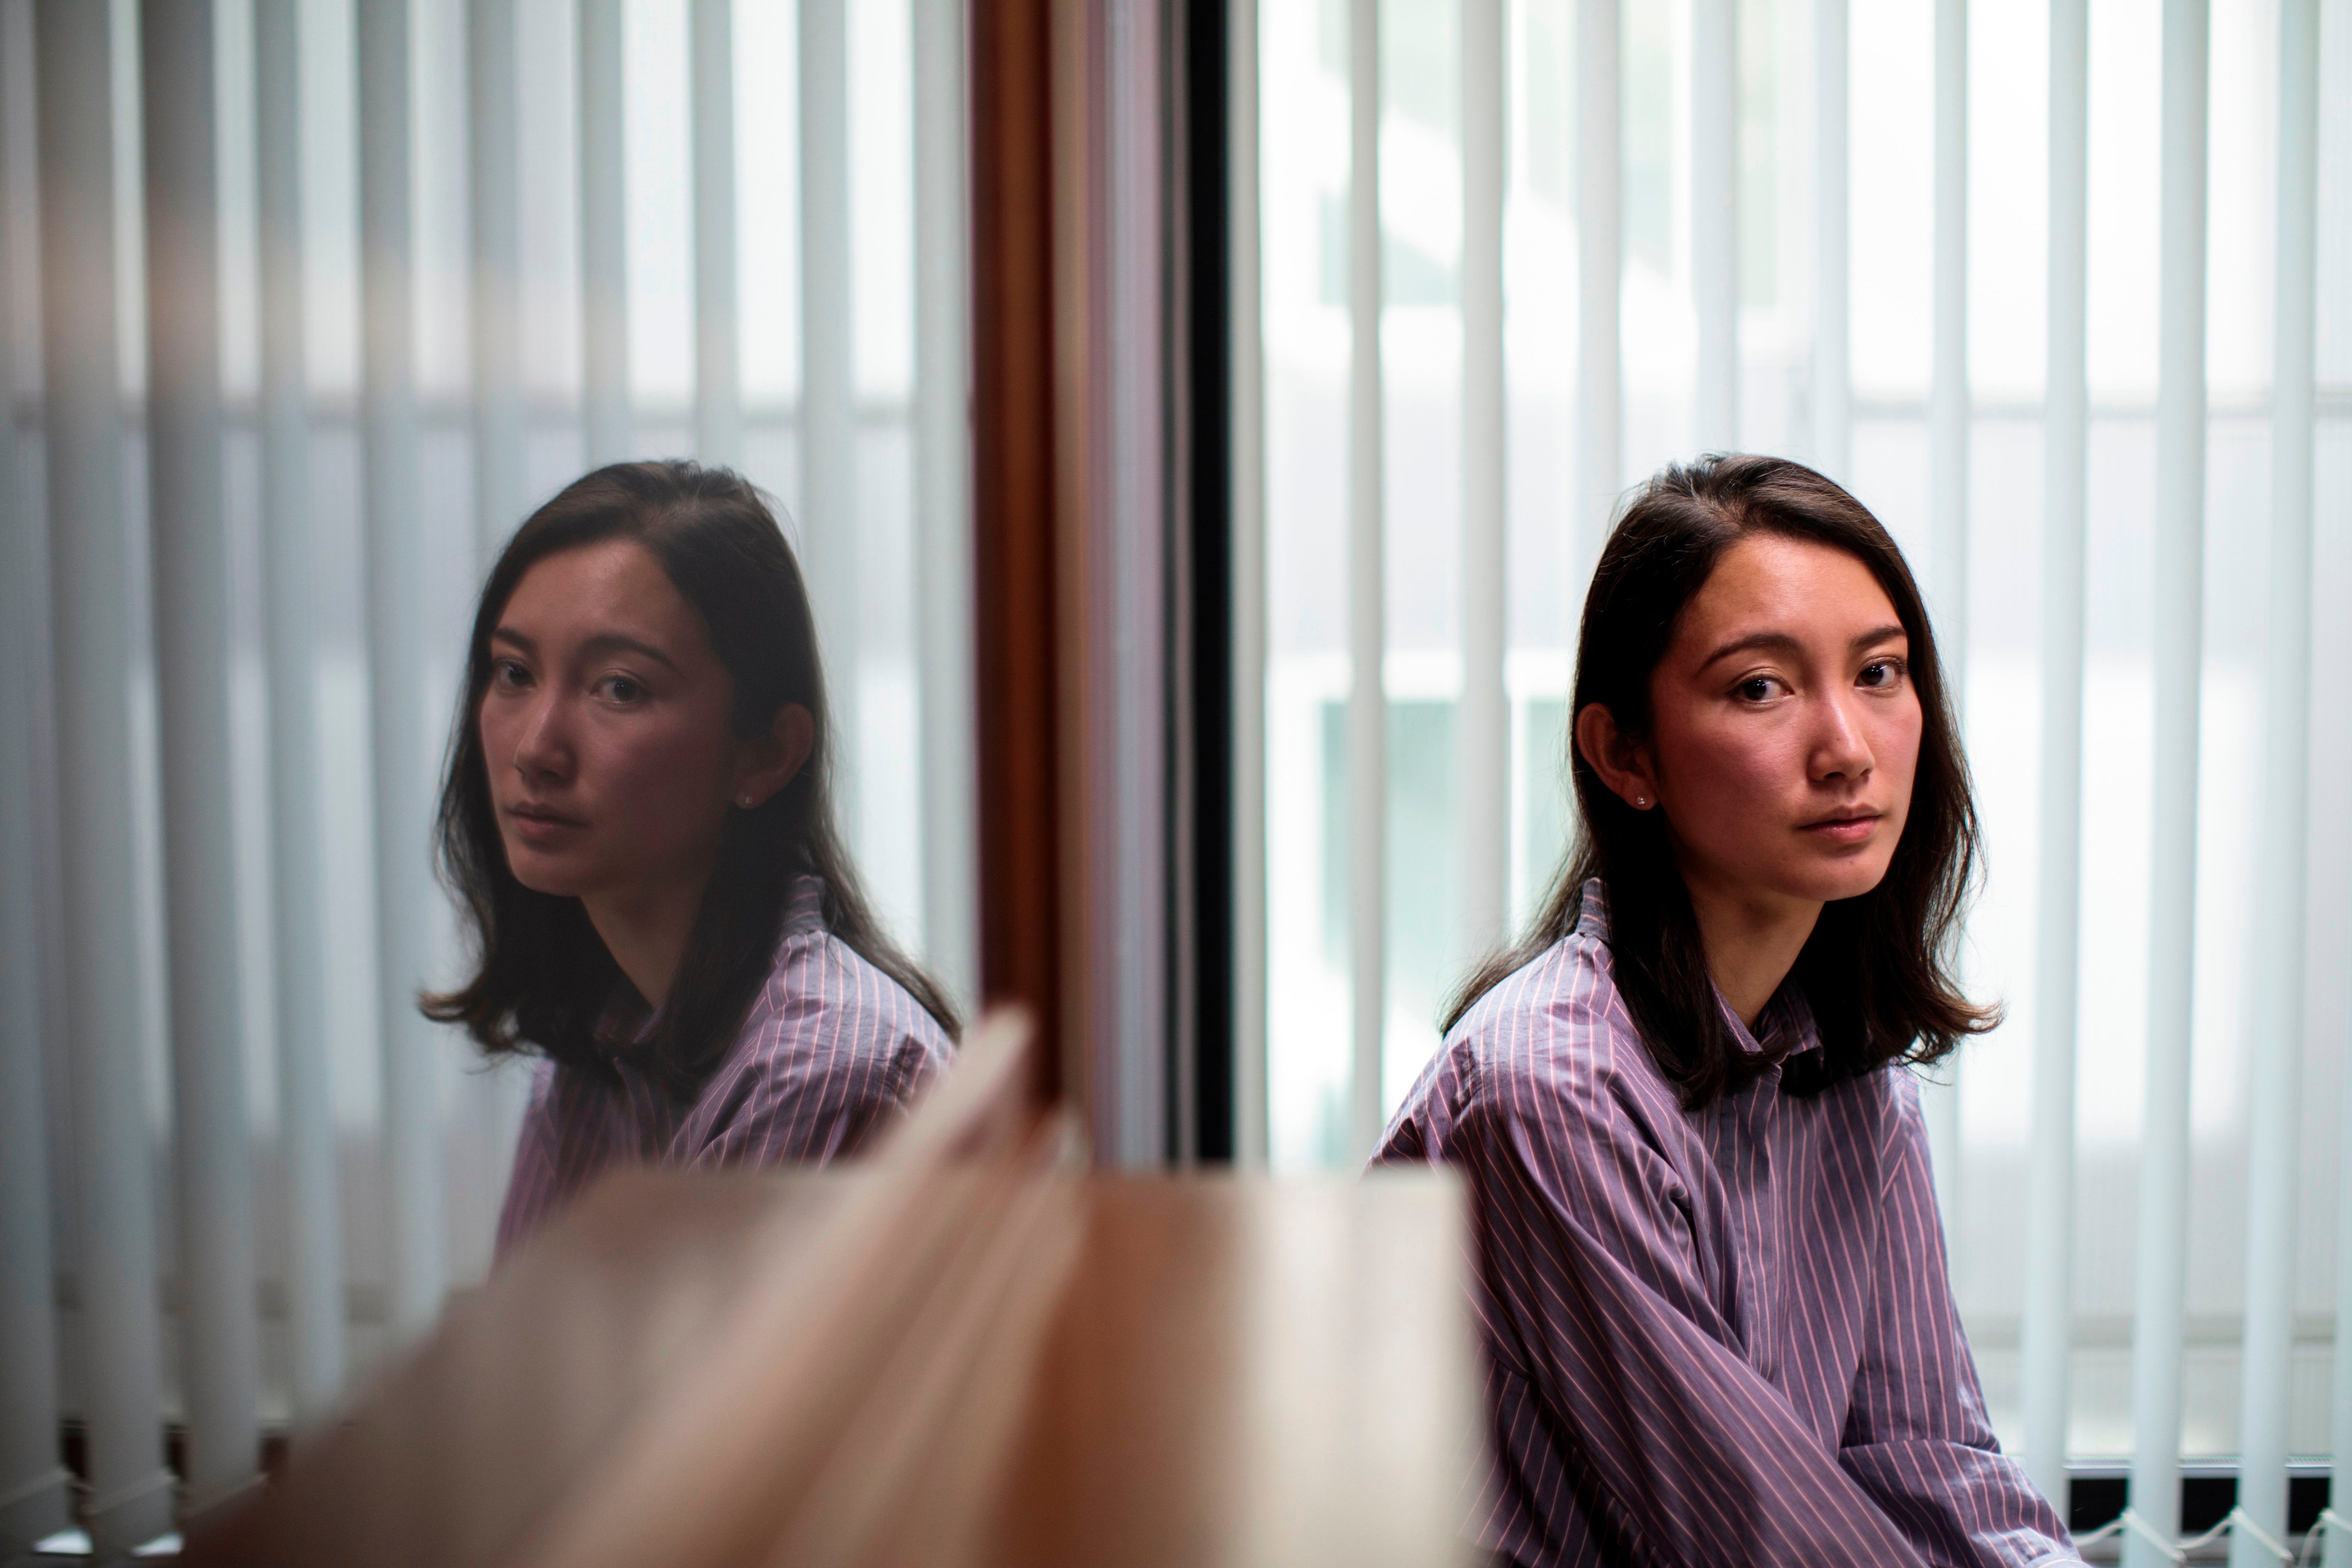 Japanese journalist Shiori Ito, who accused a television newsman of raping her in 2015, poses for a picture in Tokyo on January 30, 2018. (Behrouz Mehri—AFP/Getty Images)